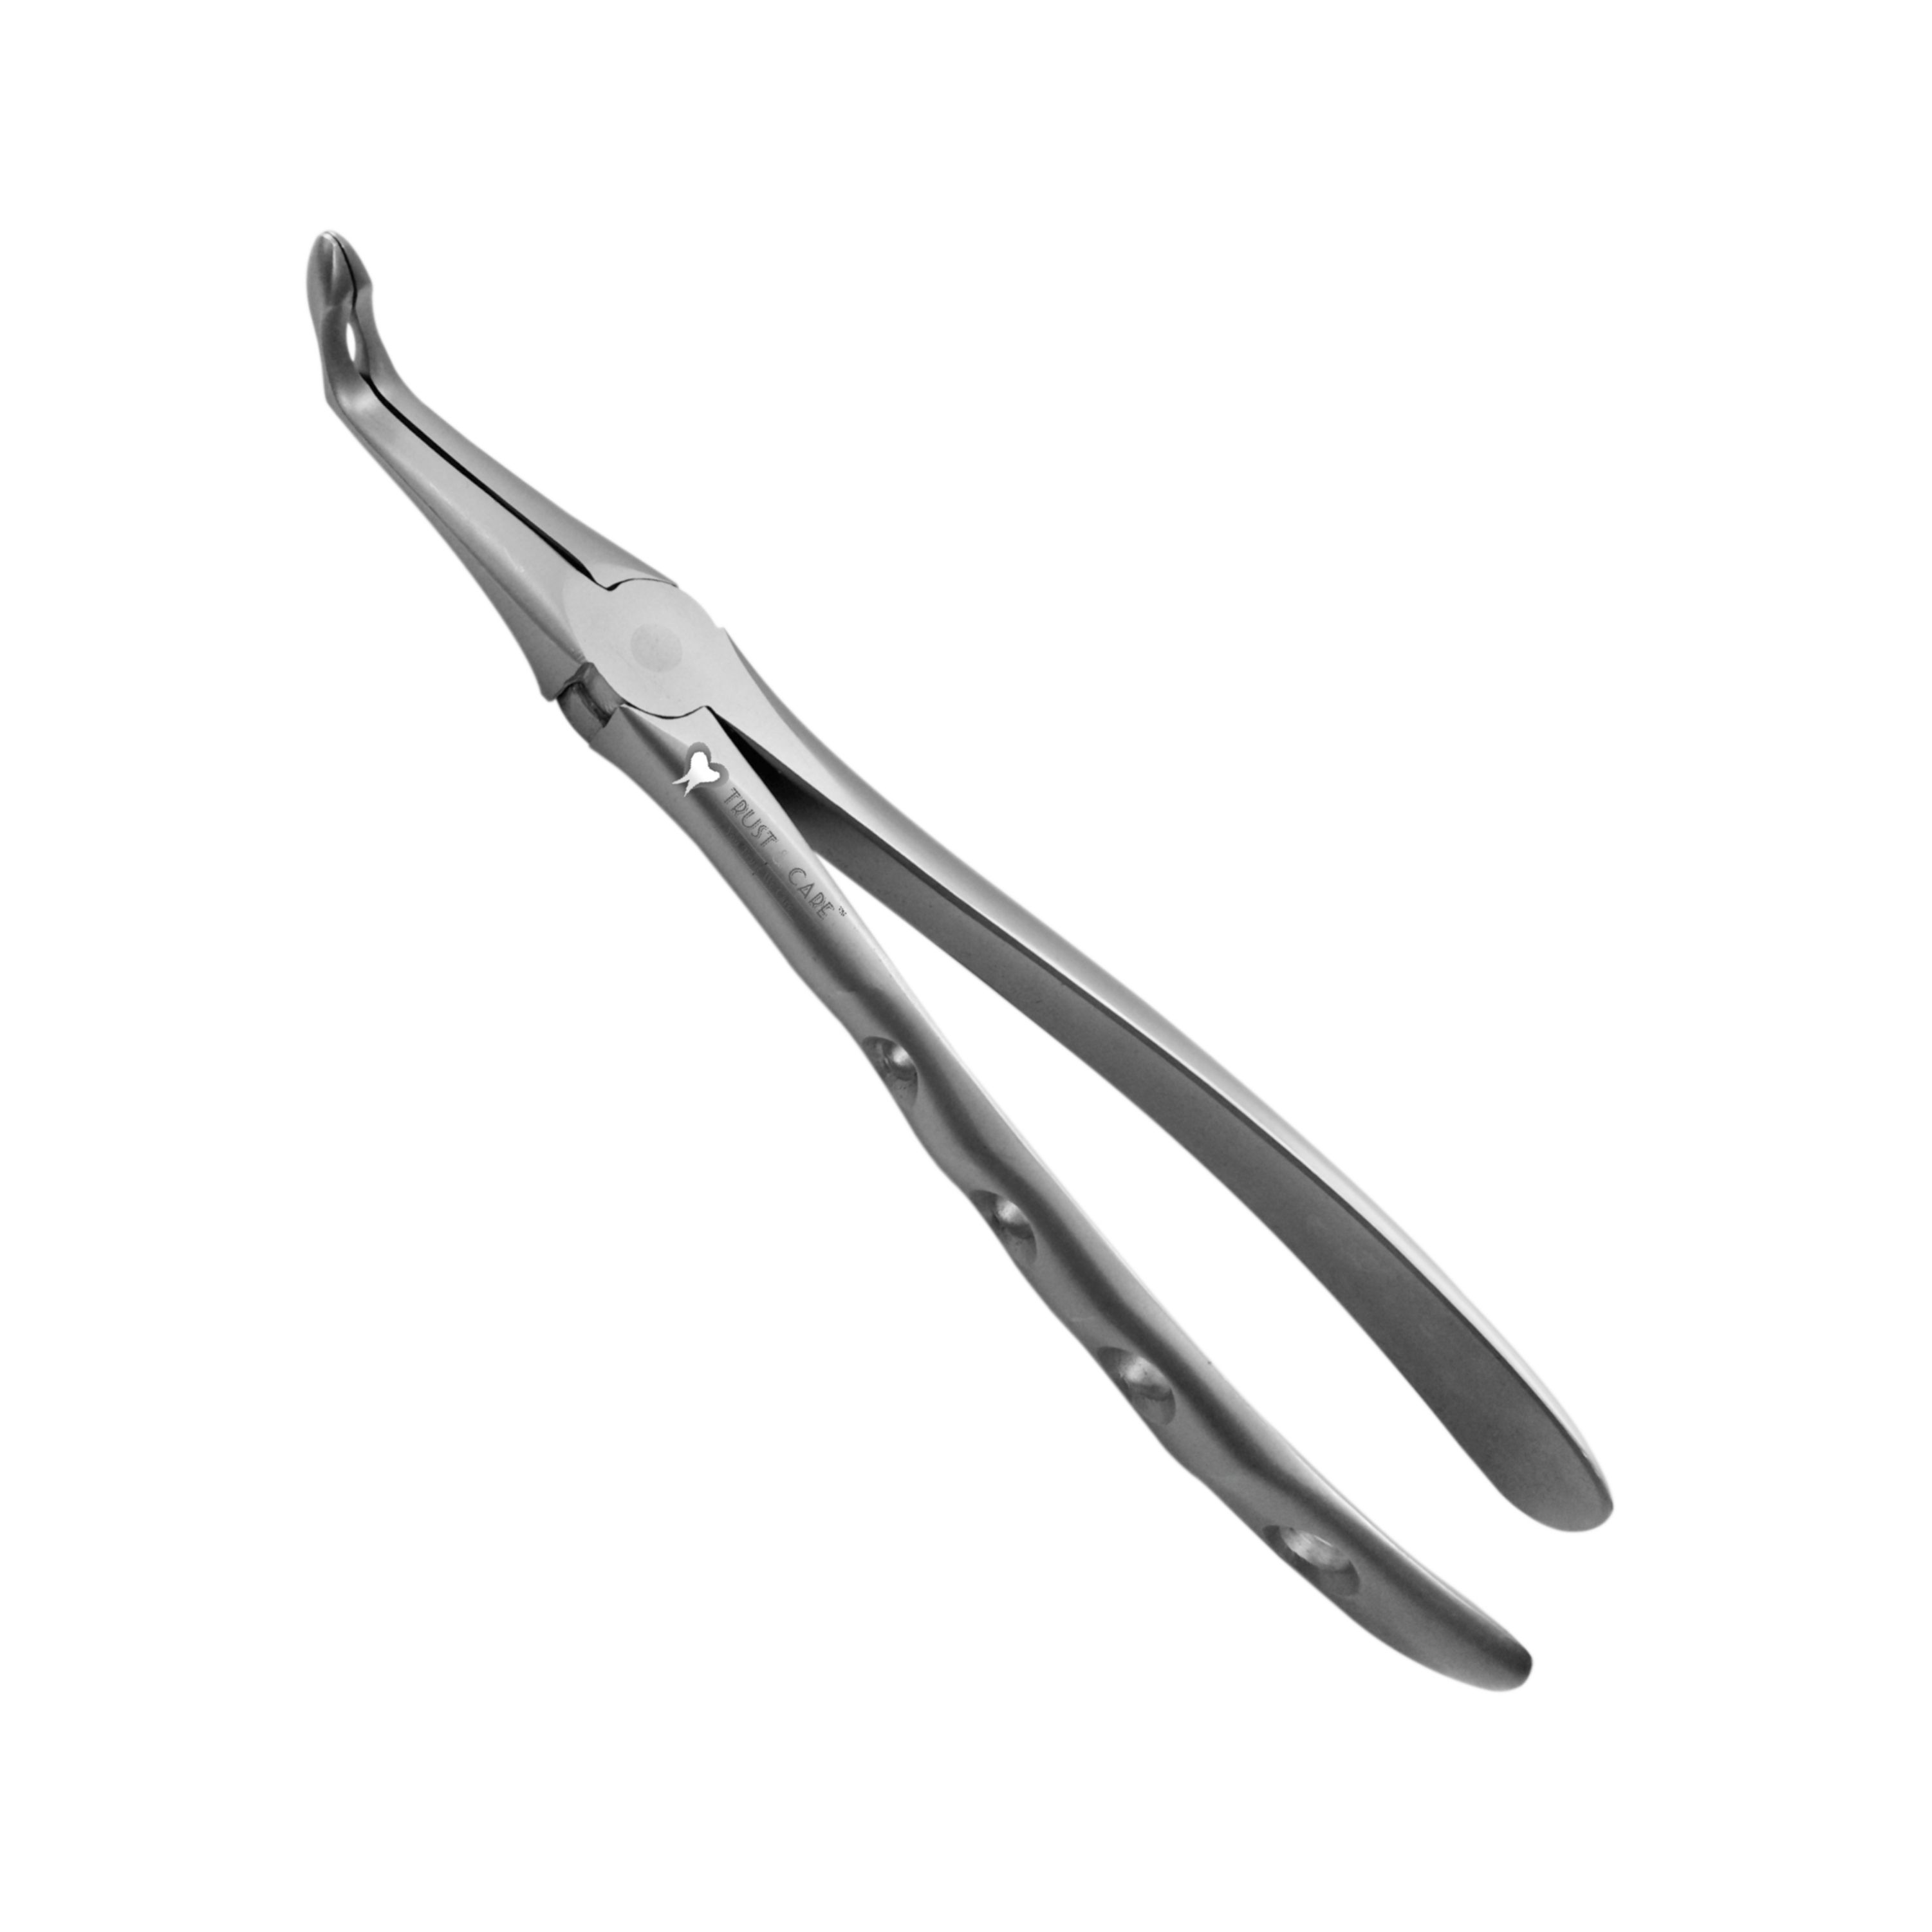 Trust & Care Secure Forcep Lower Roots Fig No. 945.00